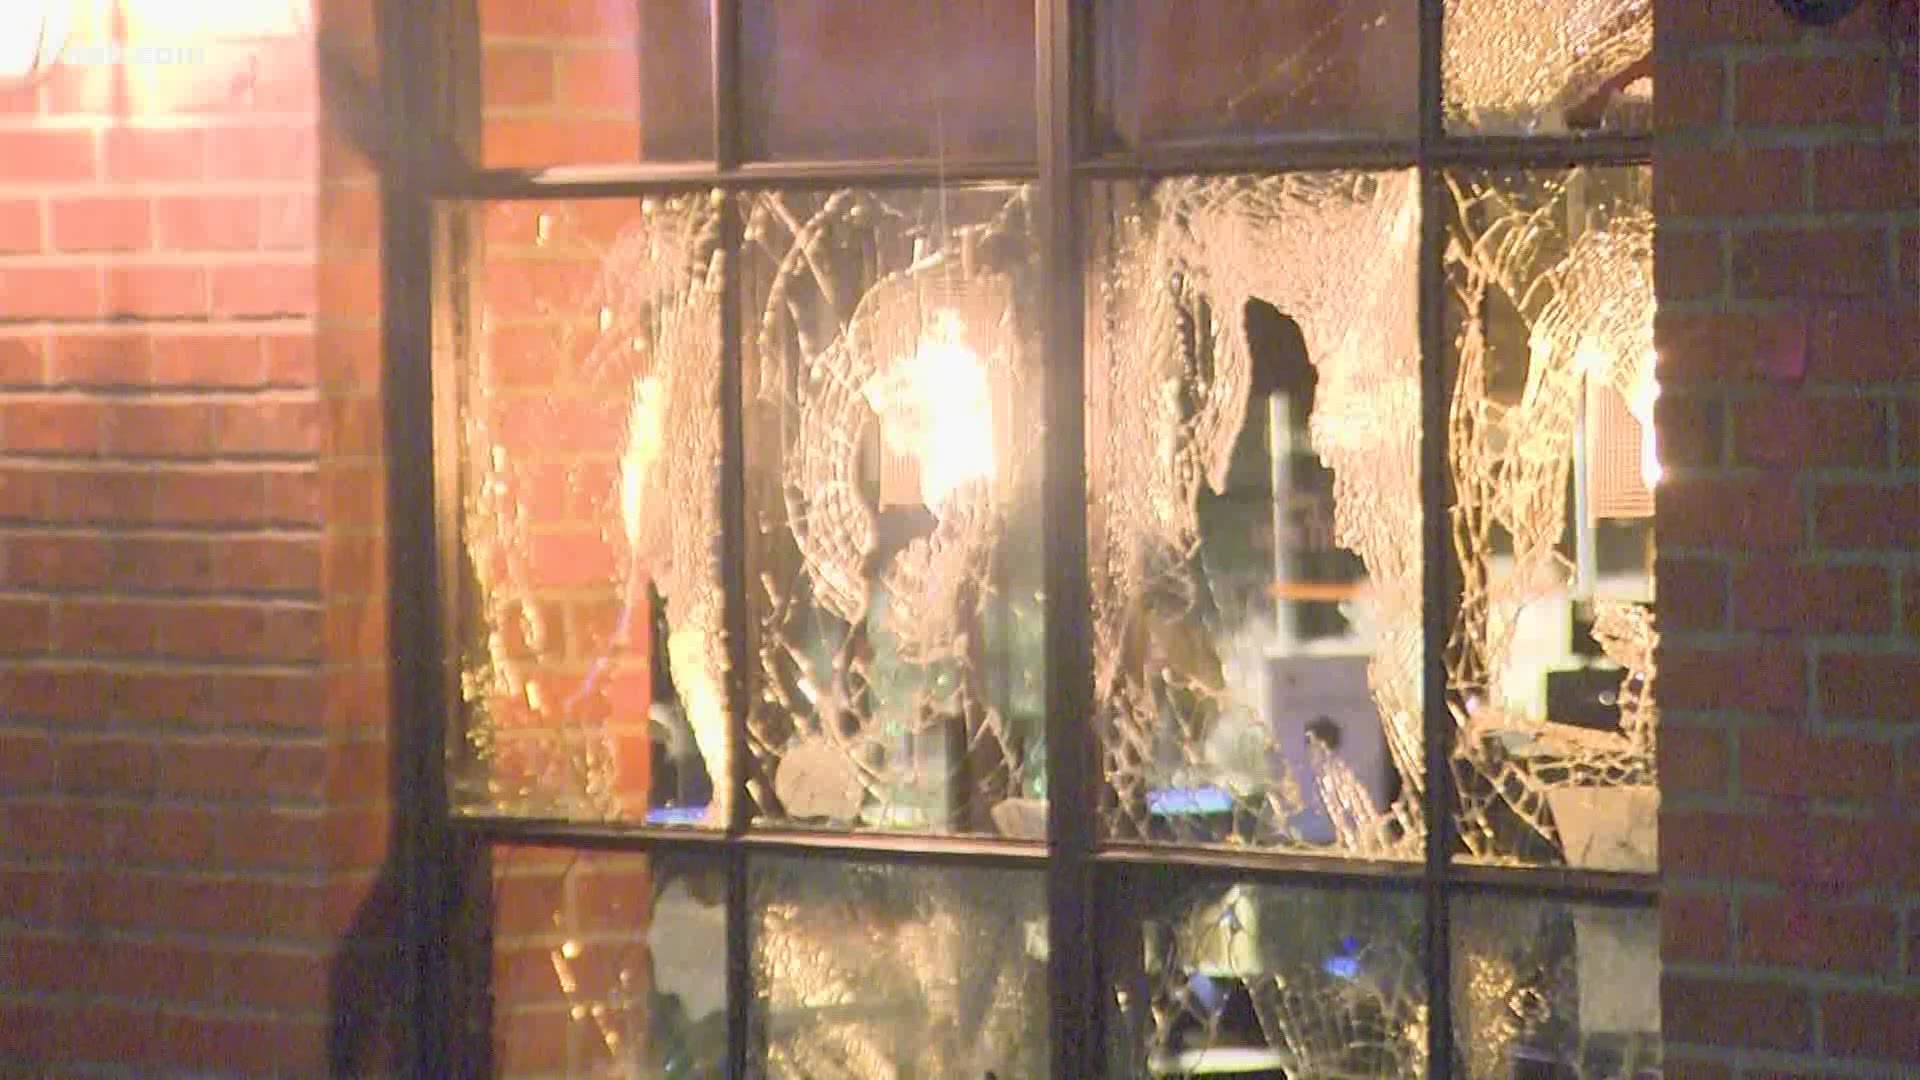 Several businesses on Capitol Hill were looted and vandalized Wednesday, including Starbucks, Whole Foods, and locally owned stores Uncle Ike's and Rove Vintage.